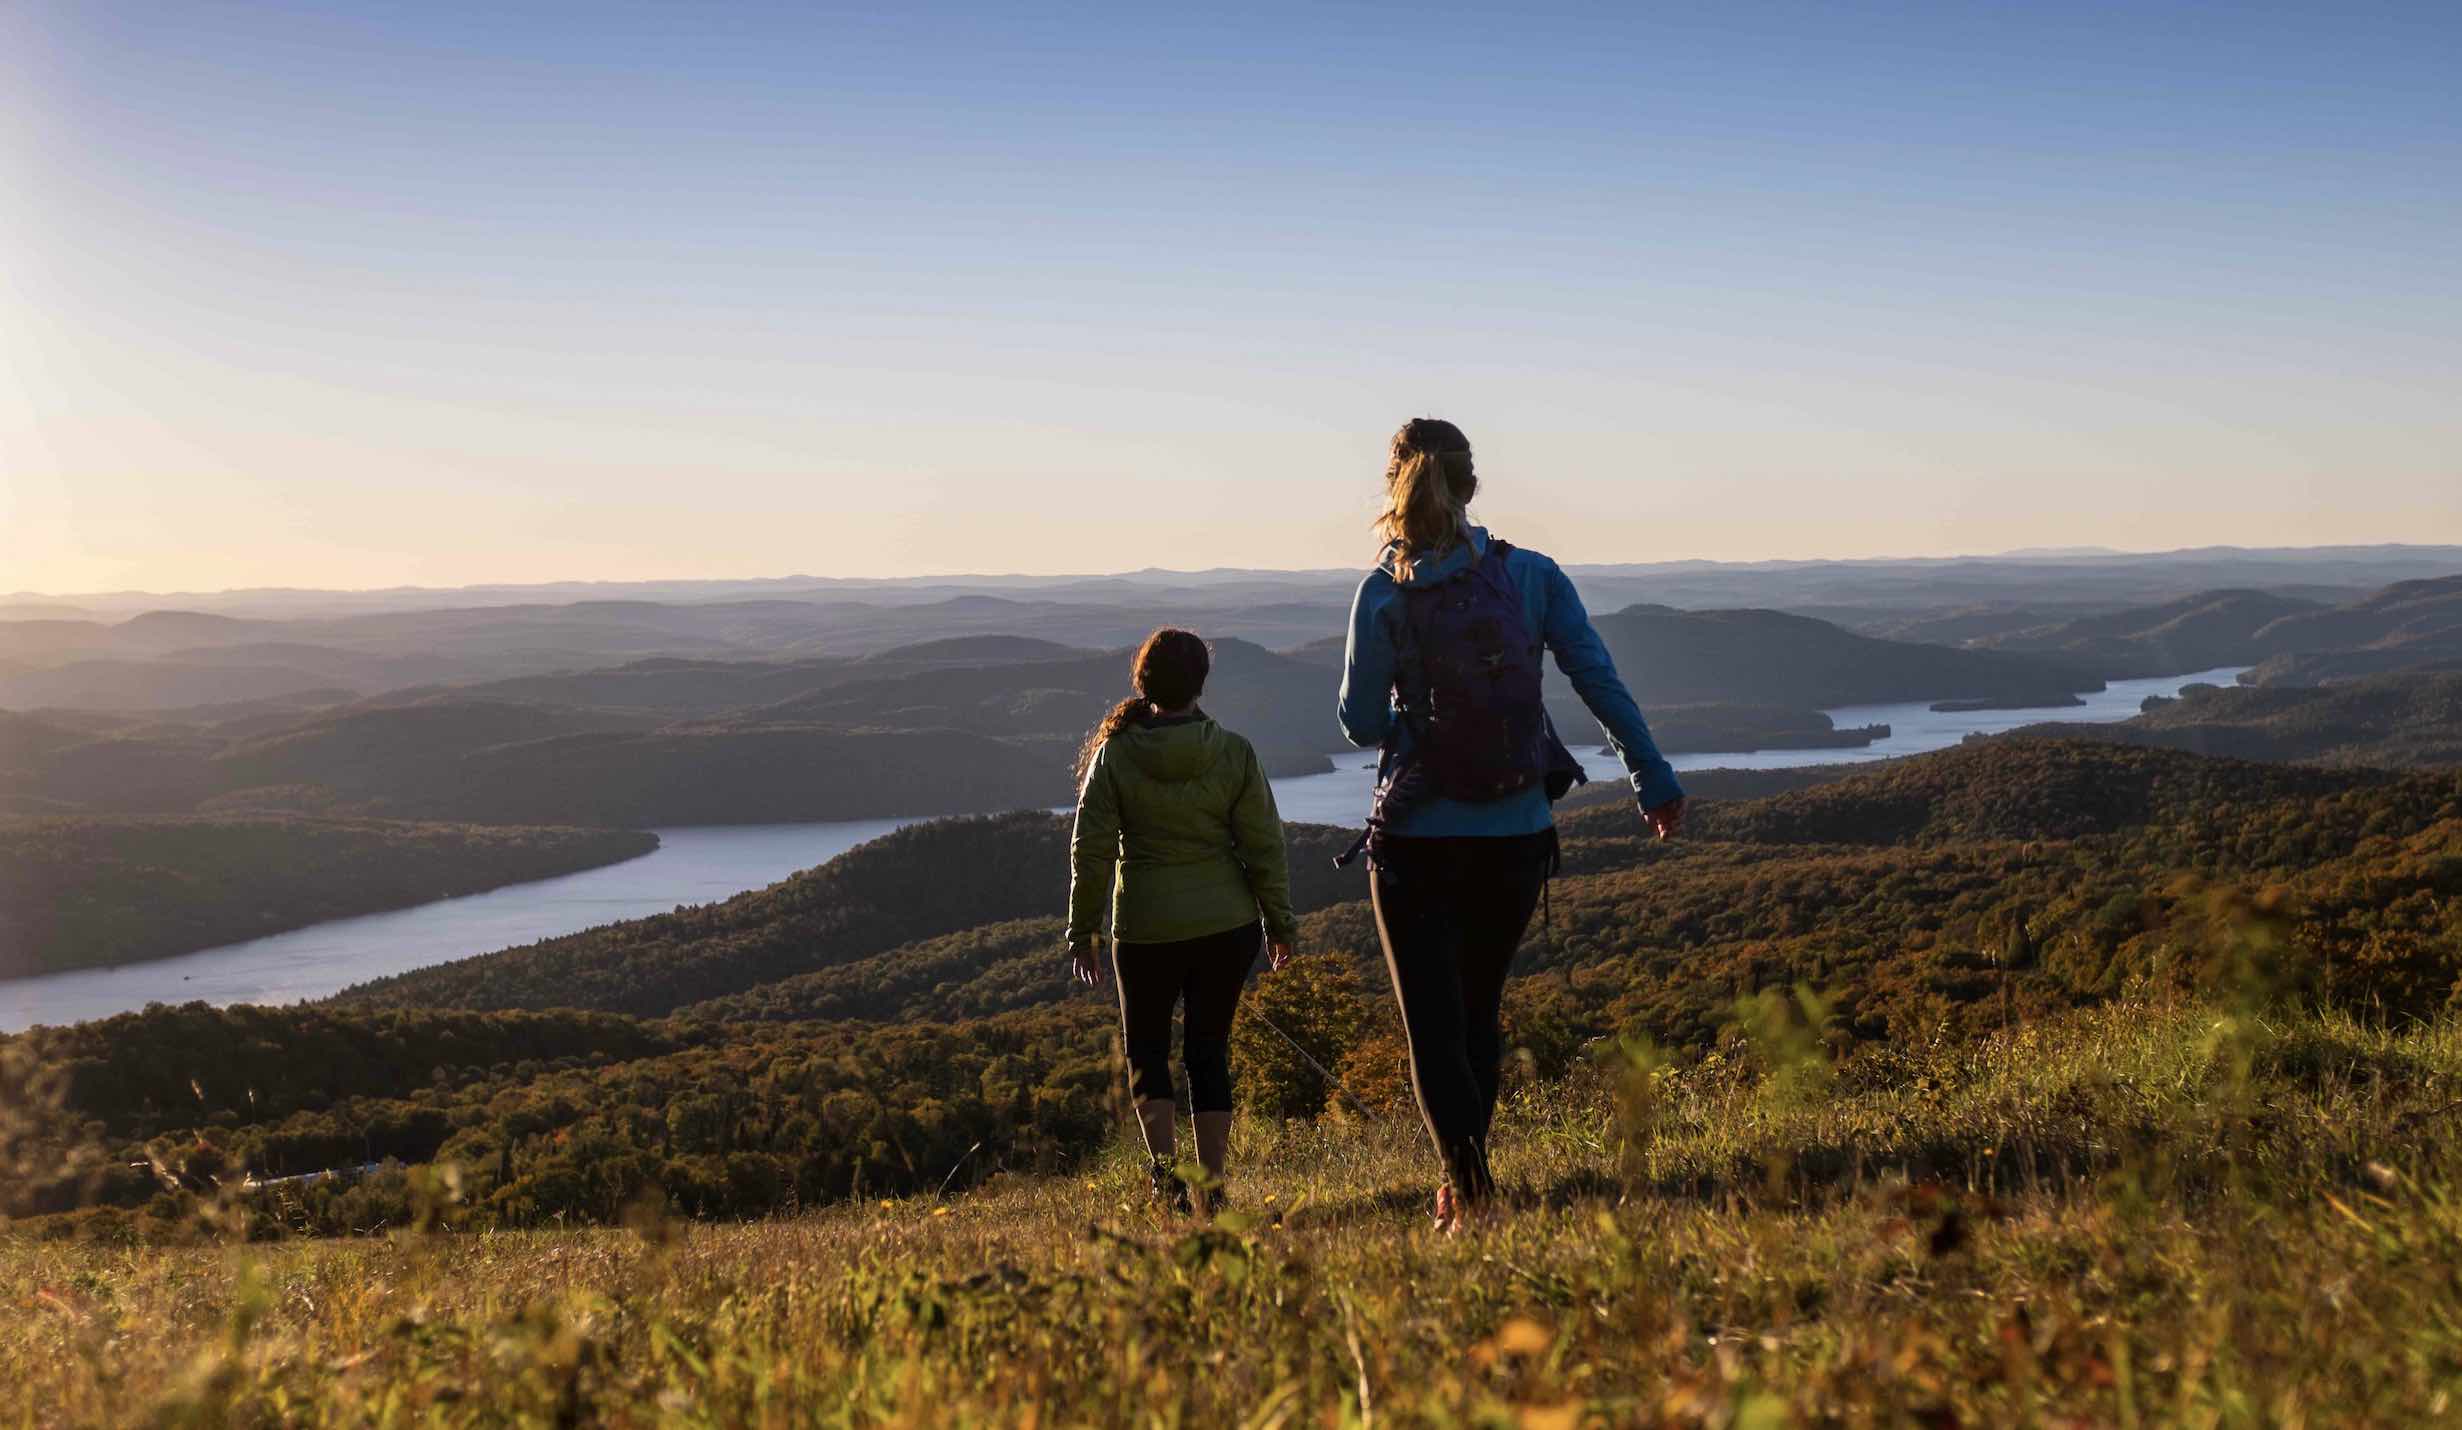 Things to do in Mont-Tremblant in summer include hiking, with 2 women looking over hills